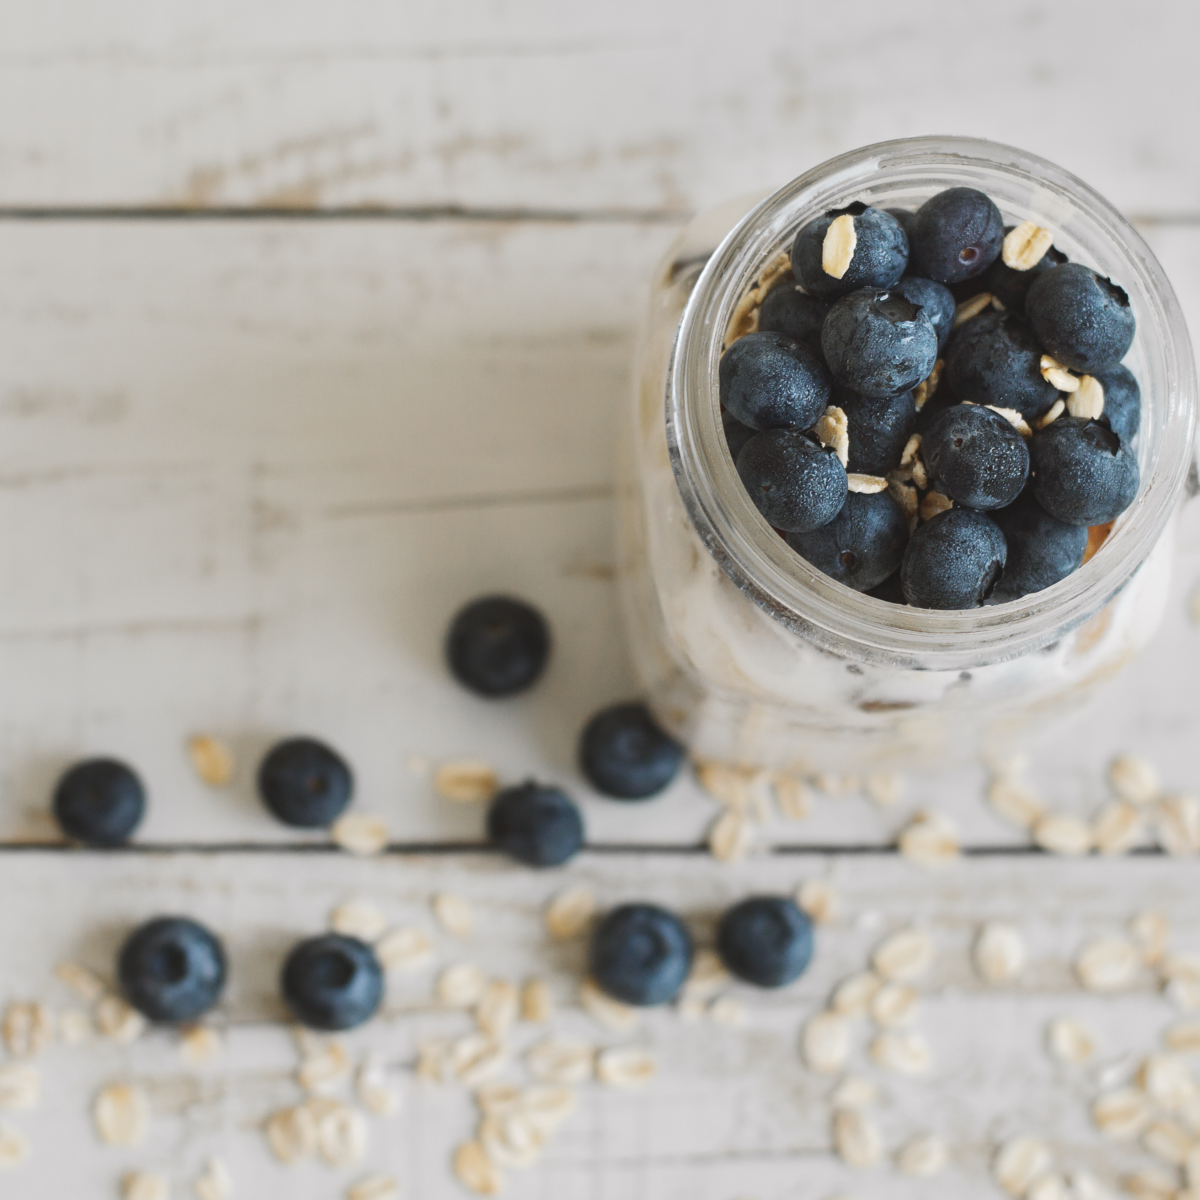 A mason jar with blurberry oats. Around the jar are scattered blueberries.